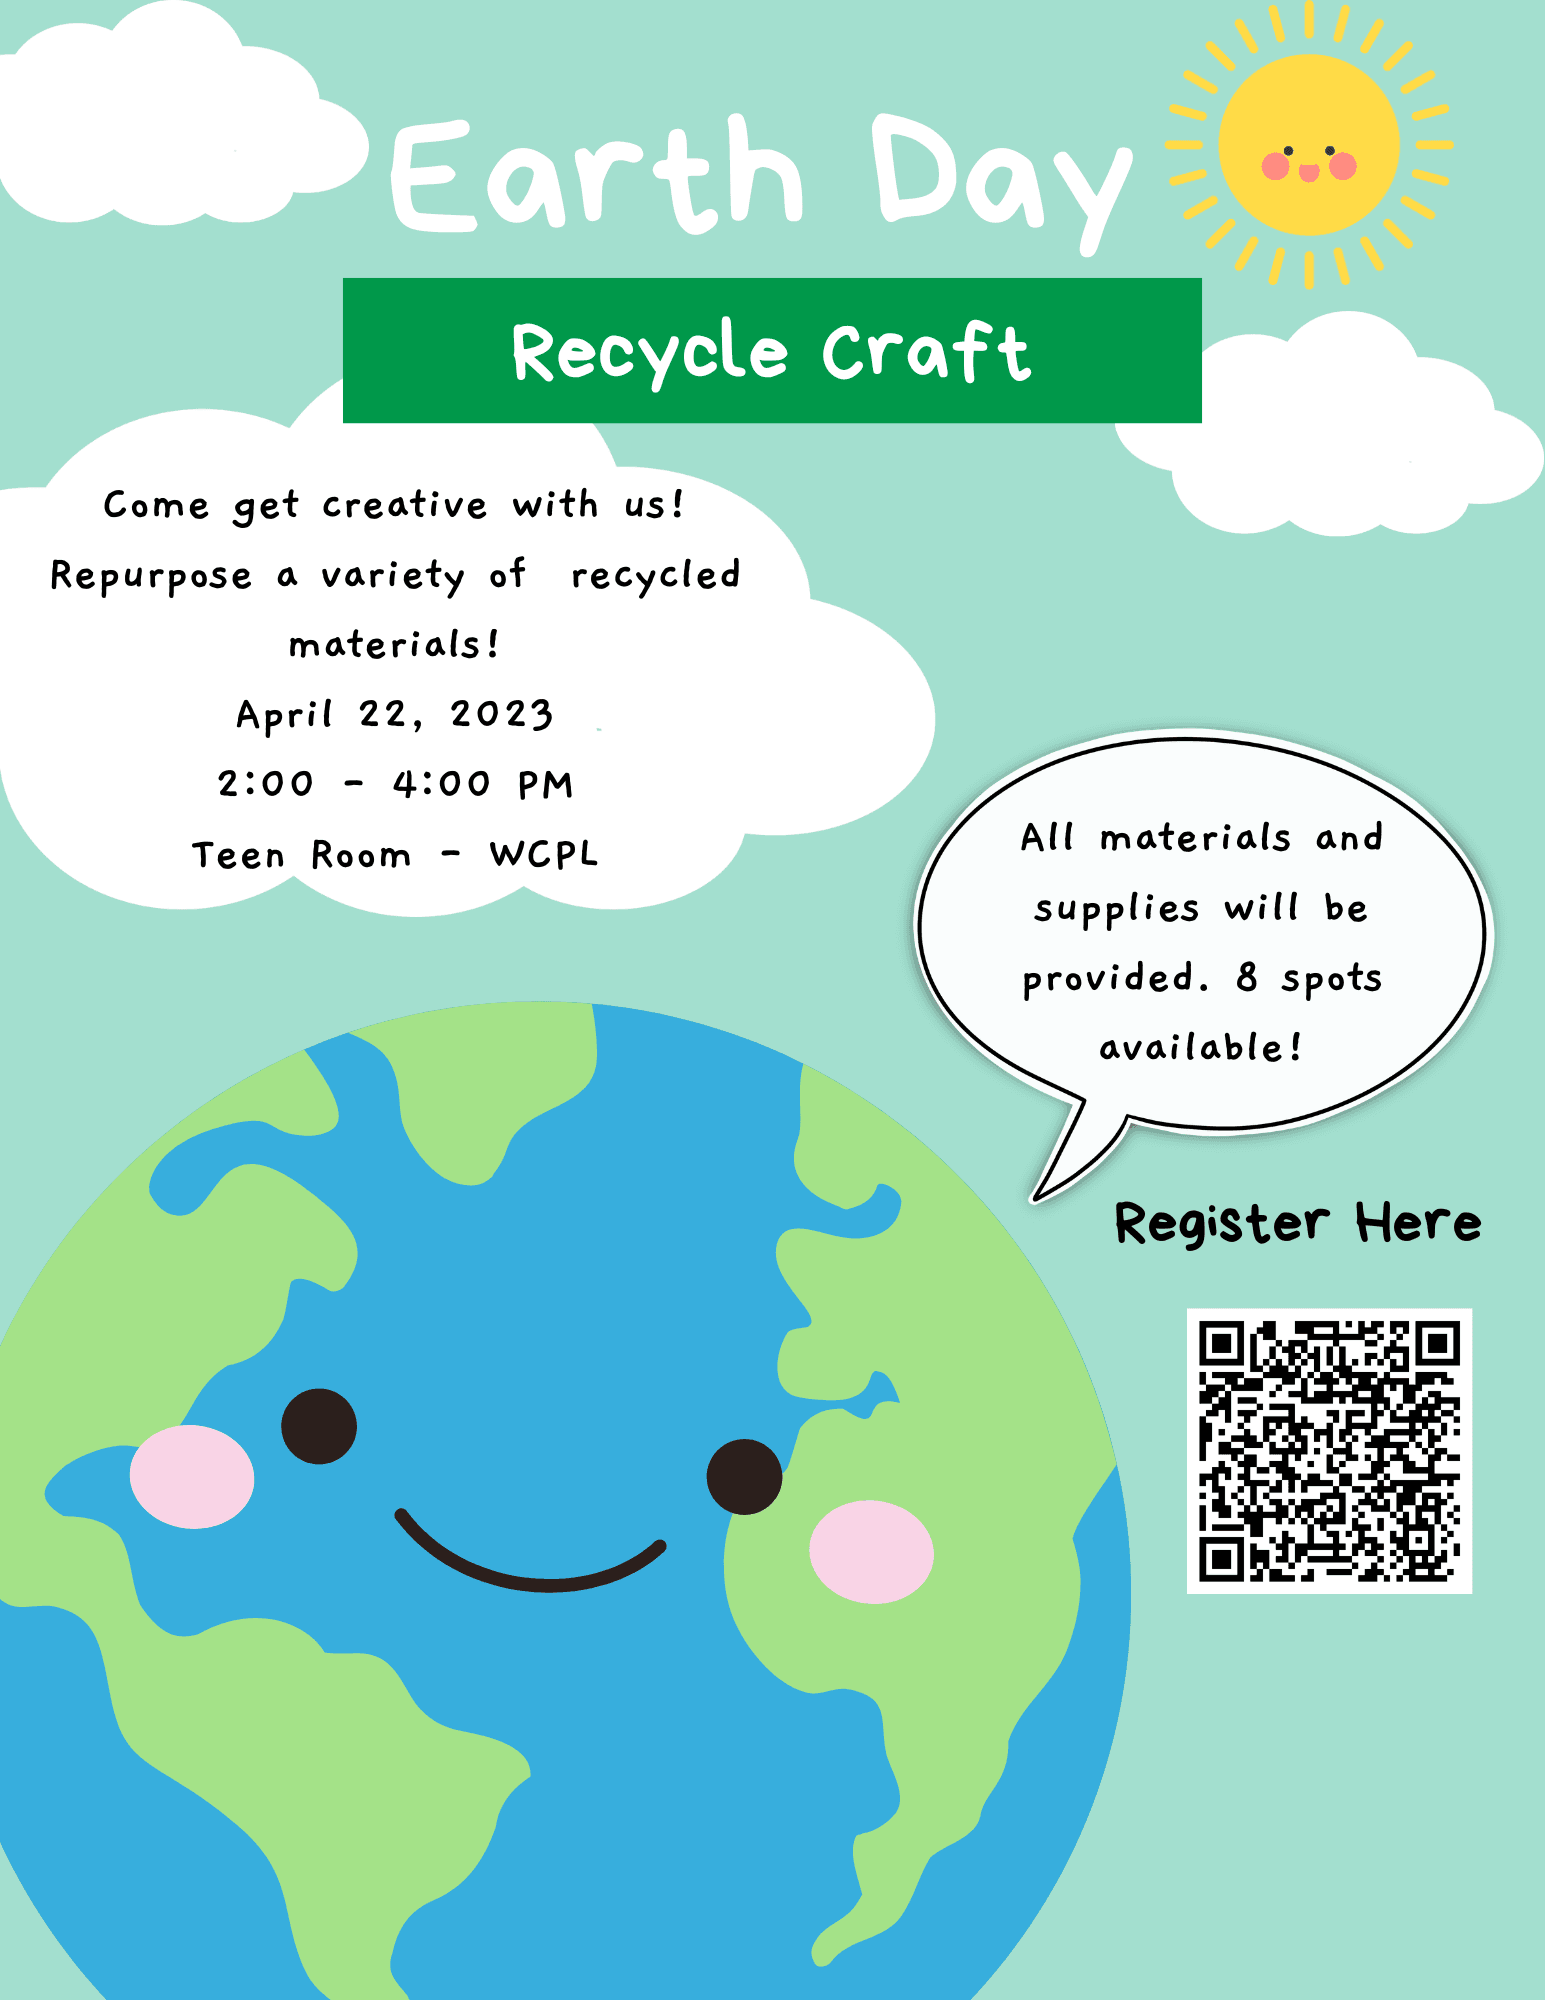 Earth Day Recycling Craft event in Franklin TN.